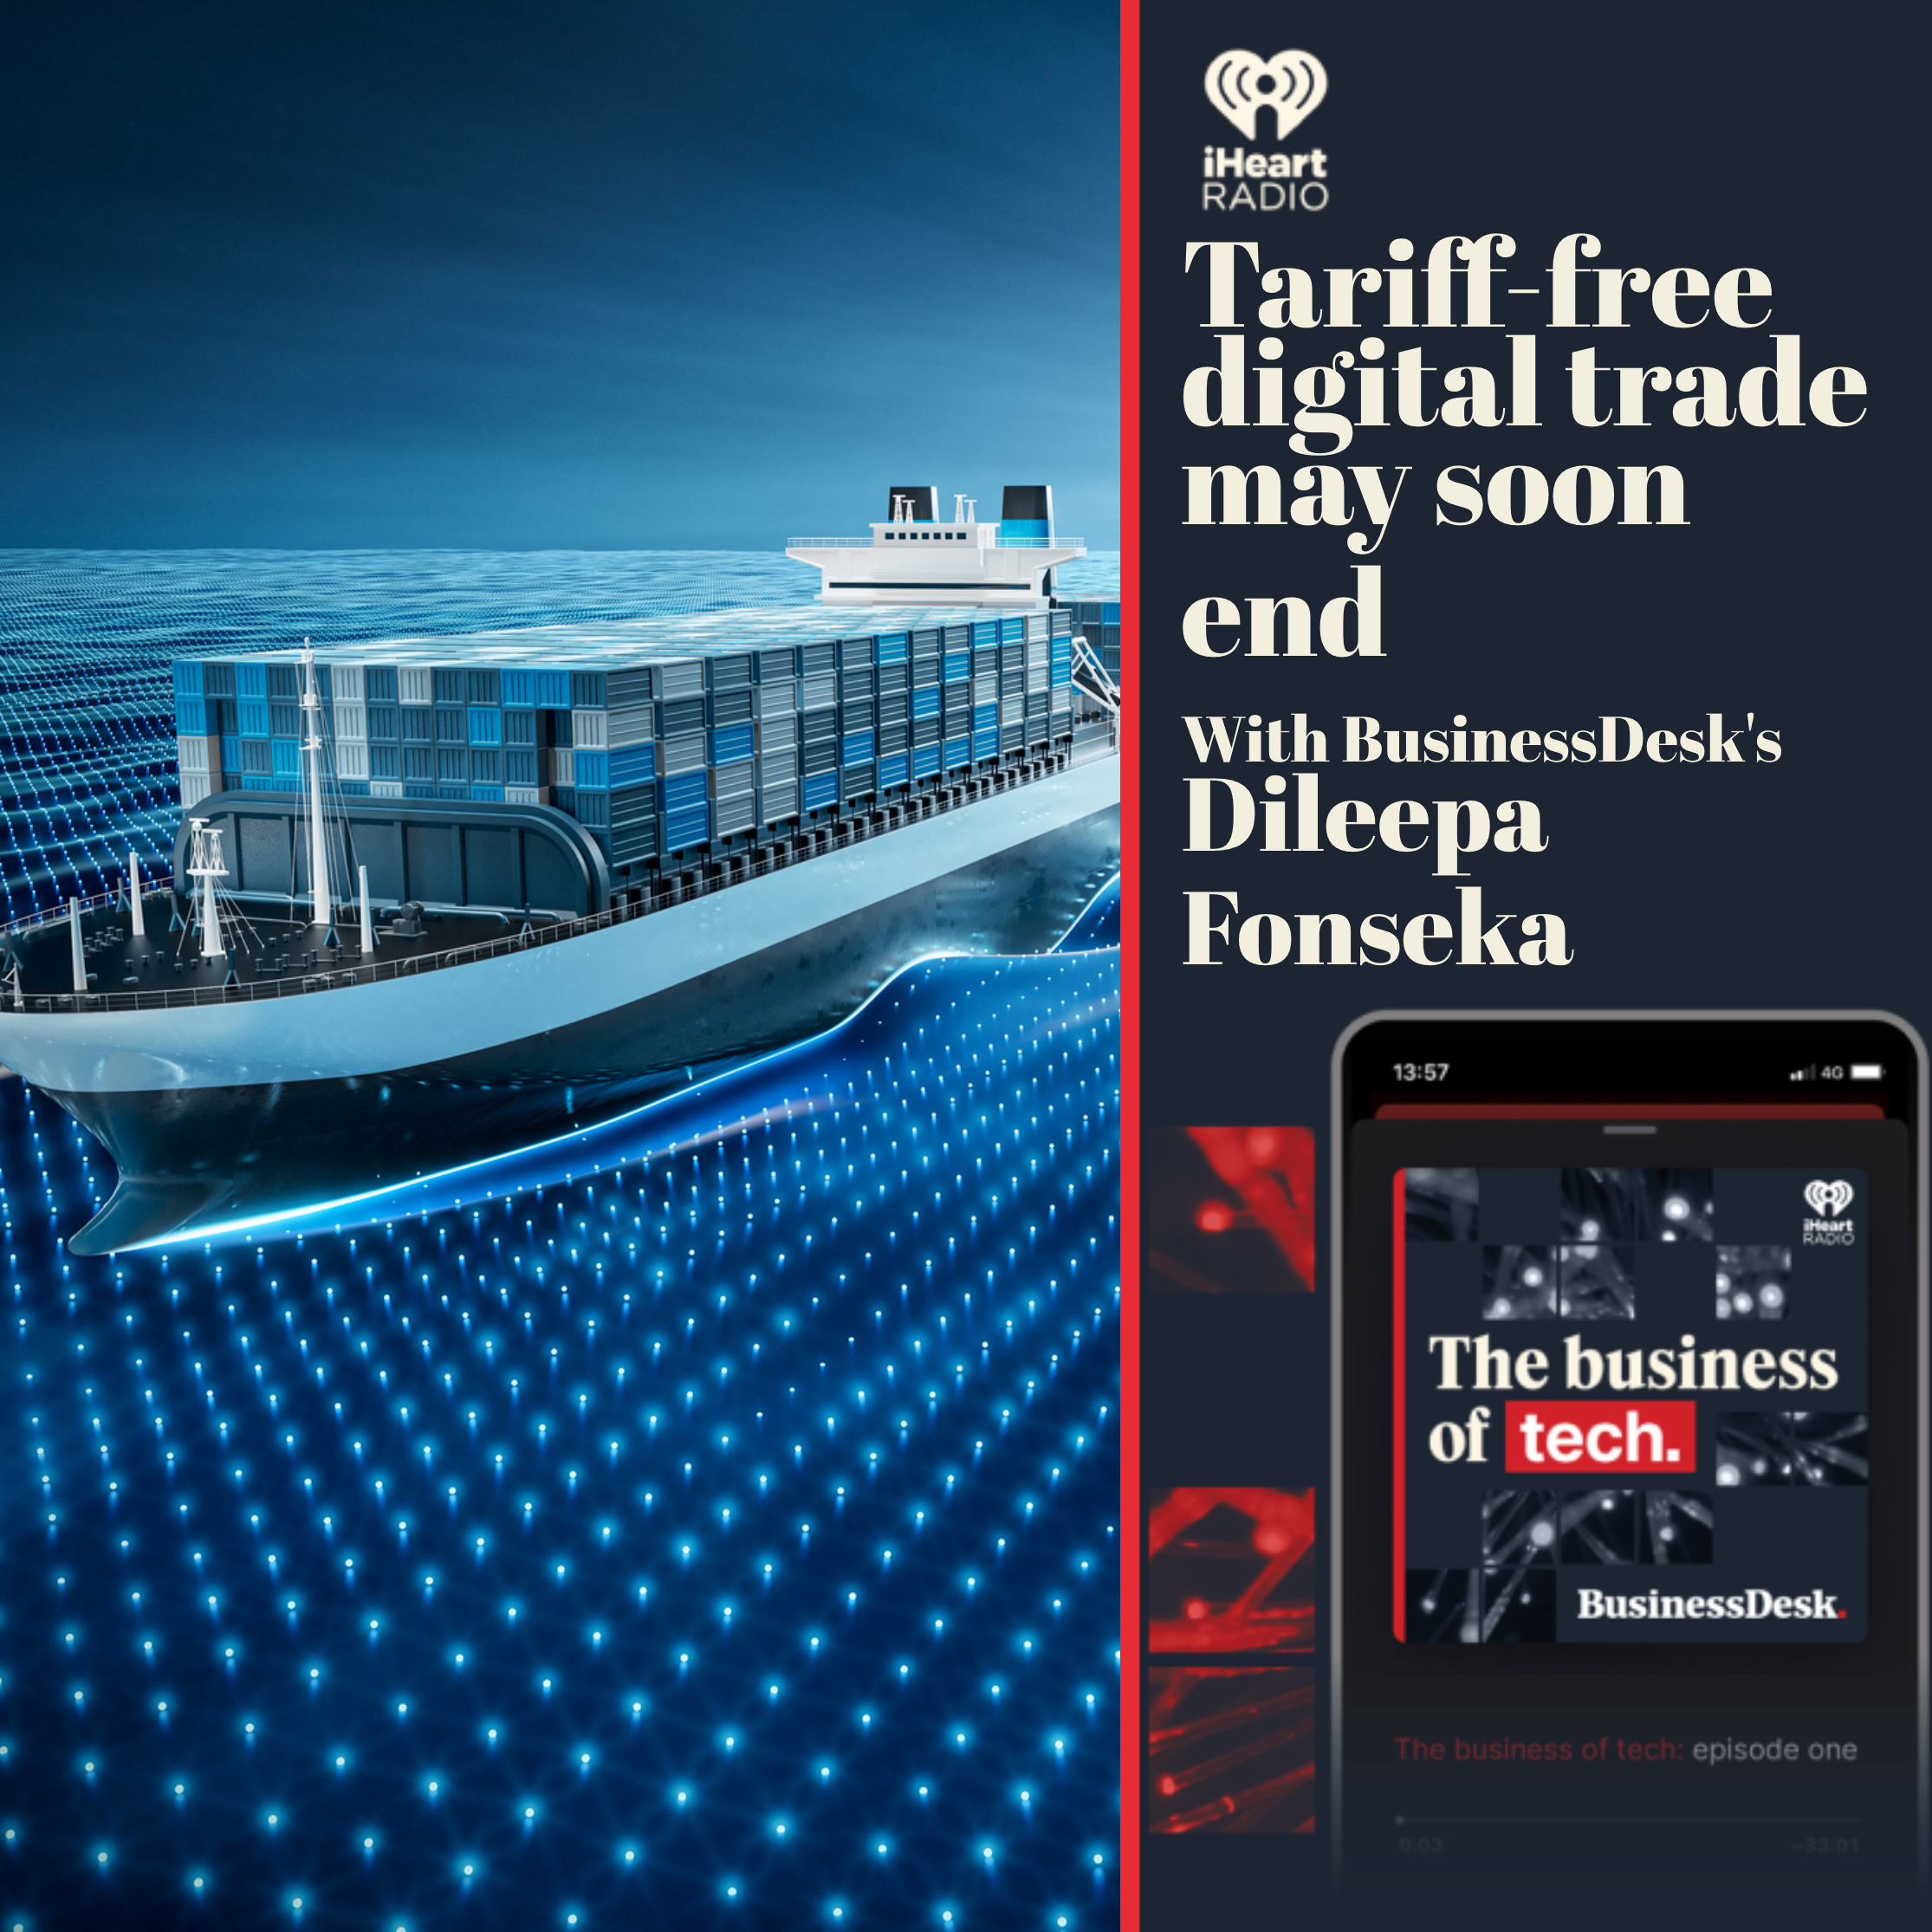 Tariff-free digital trade may be about to end